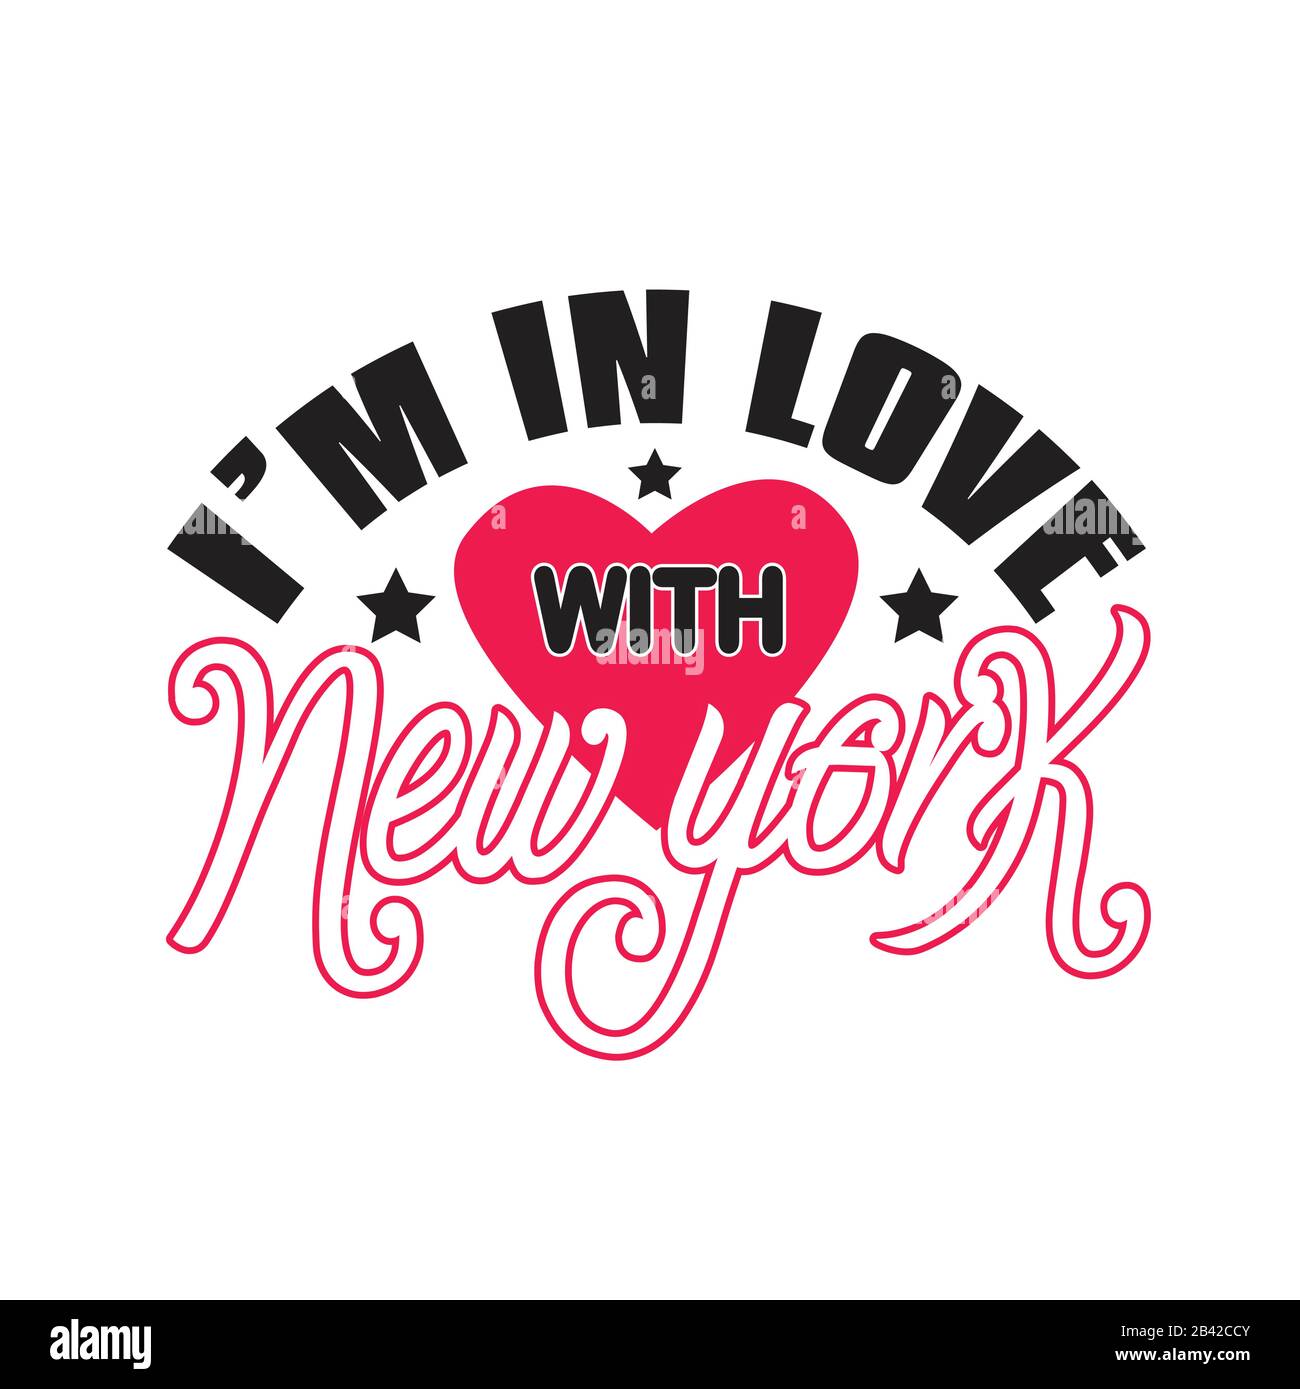 New York Quotes and Slogan good for Tee. I m In Love With New York. Stock Vector